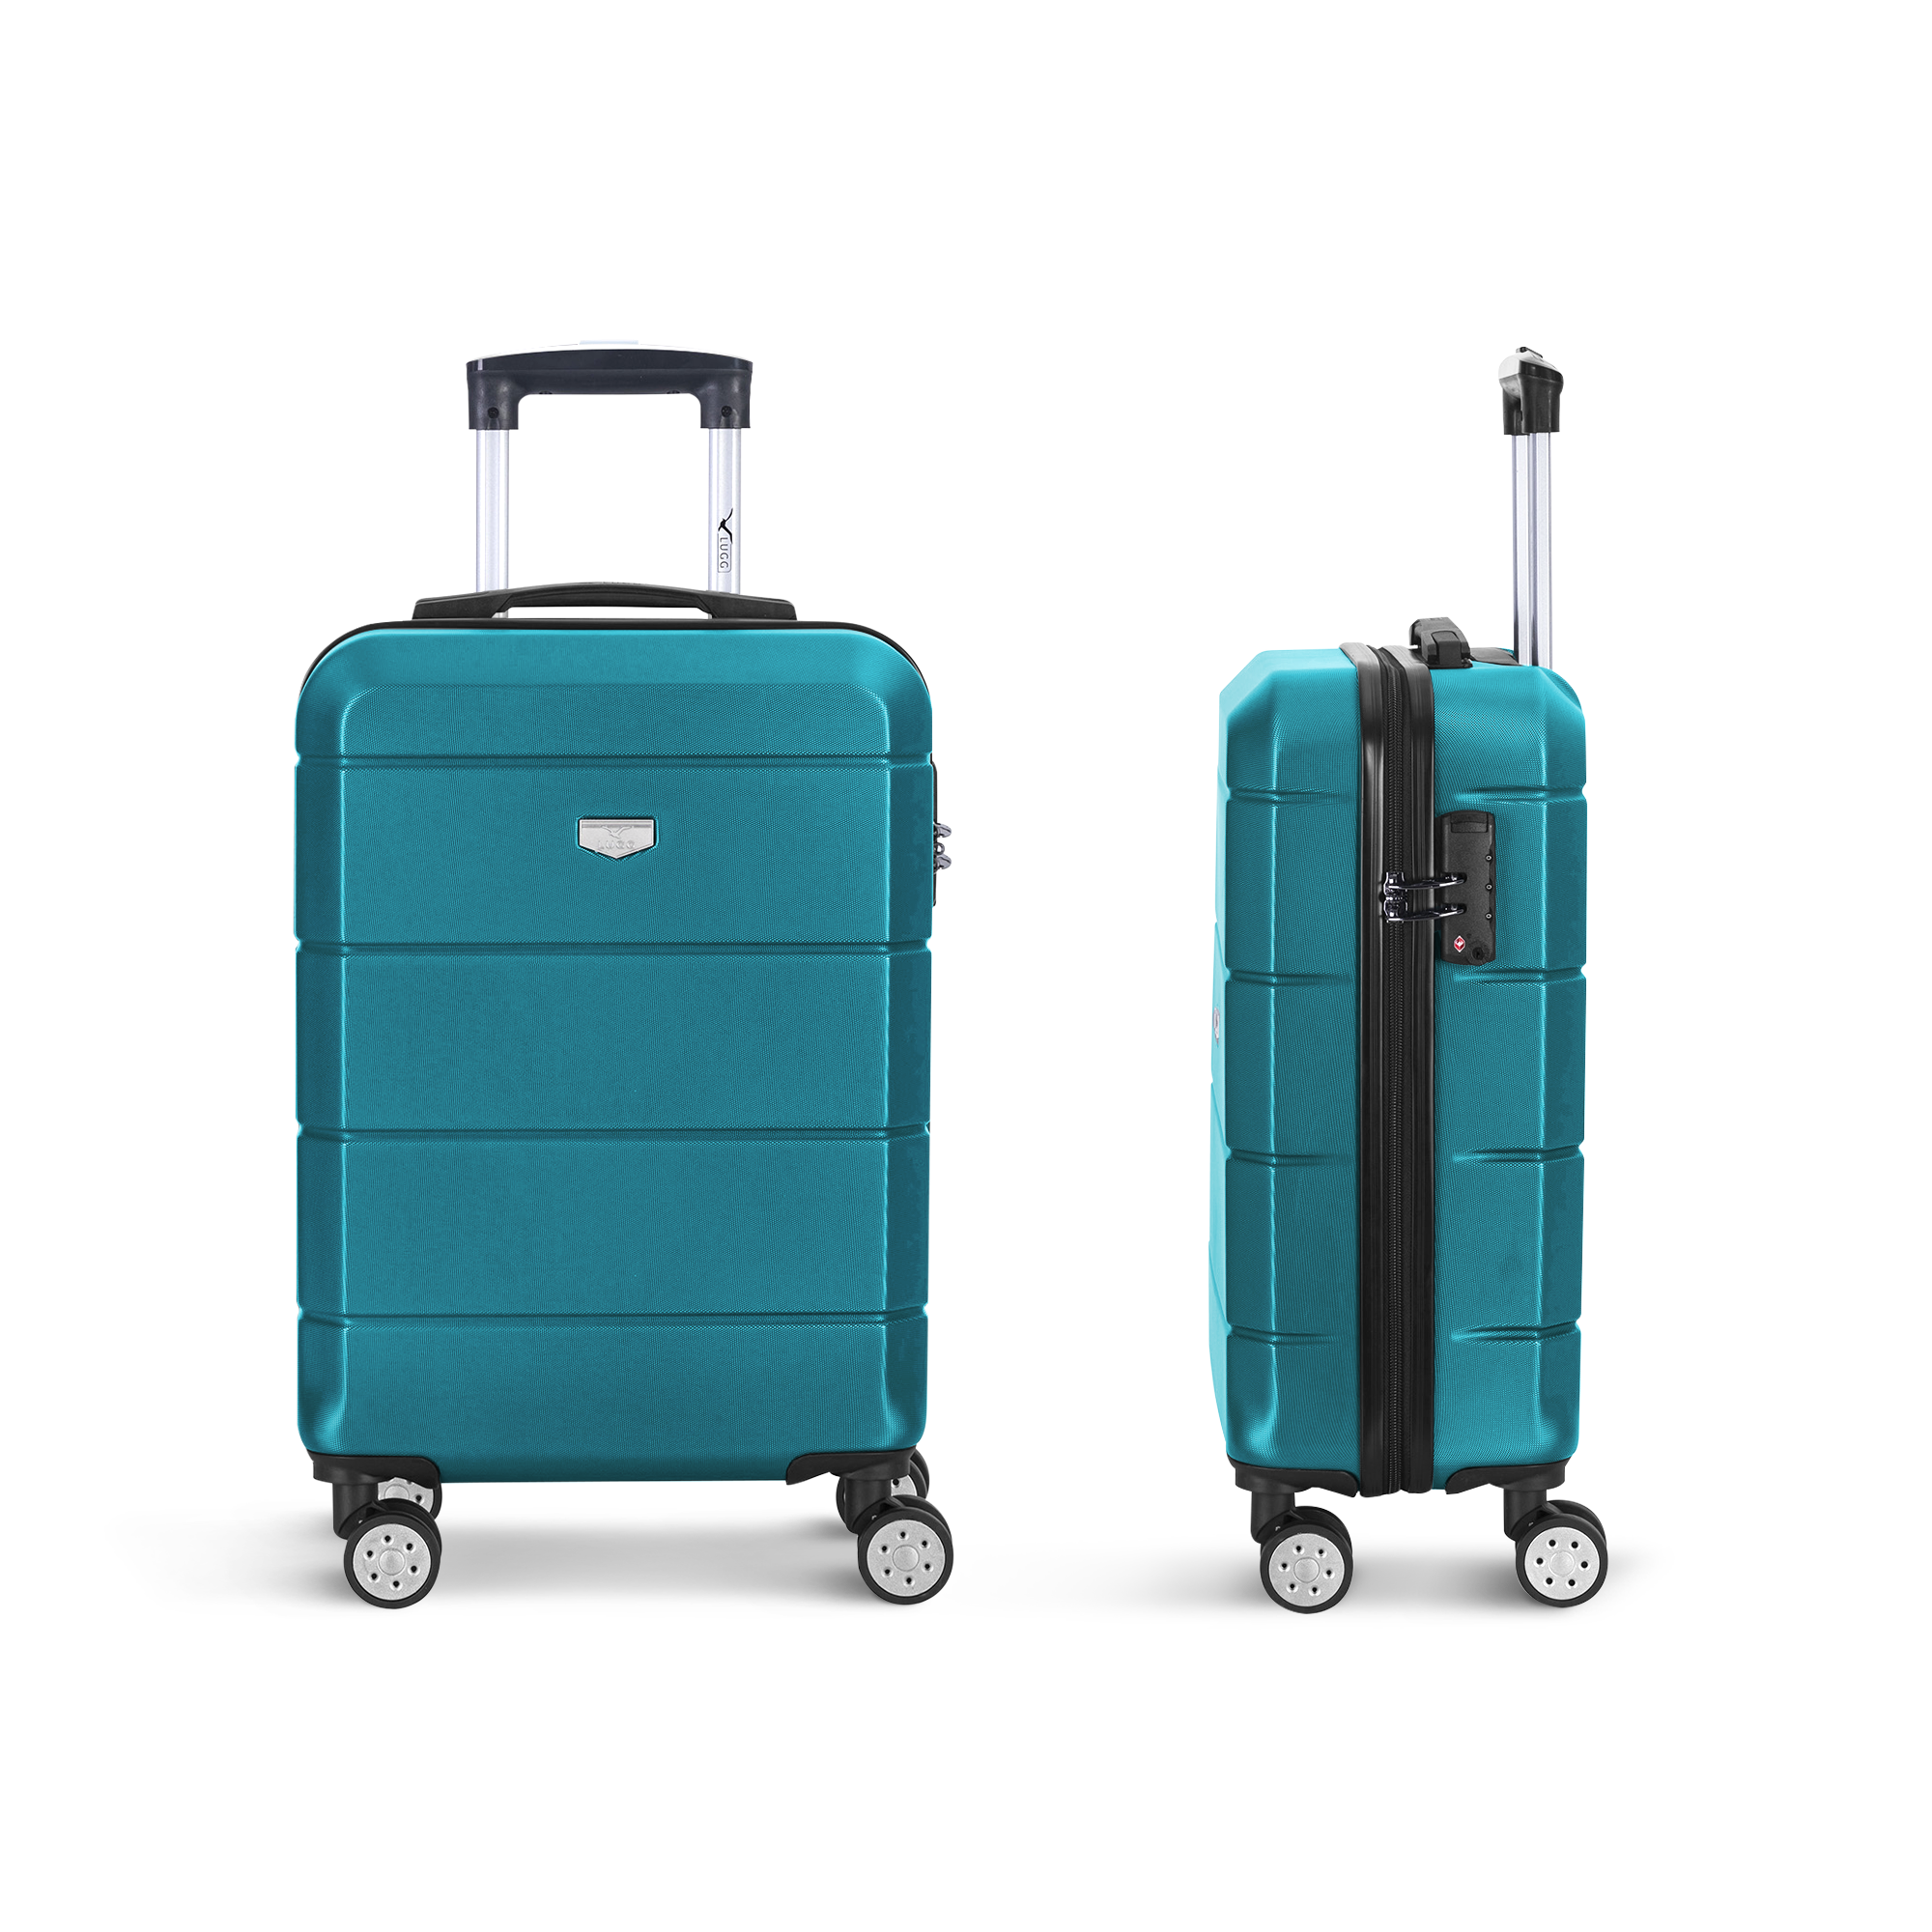 Jetset 20-inch Suitcase in Teal